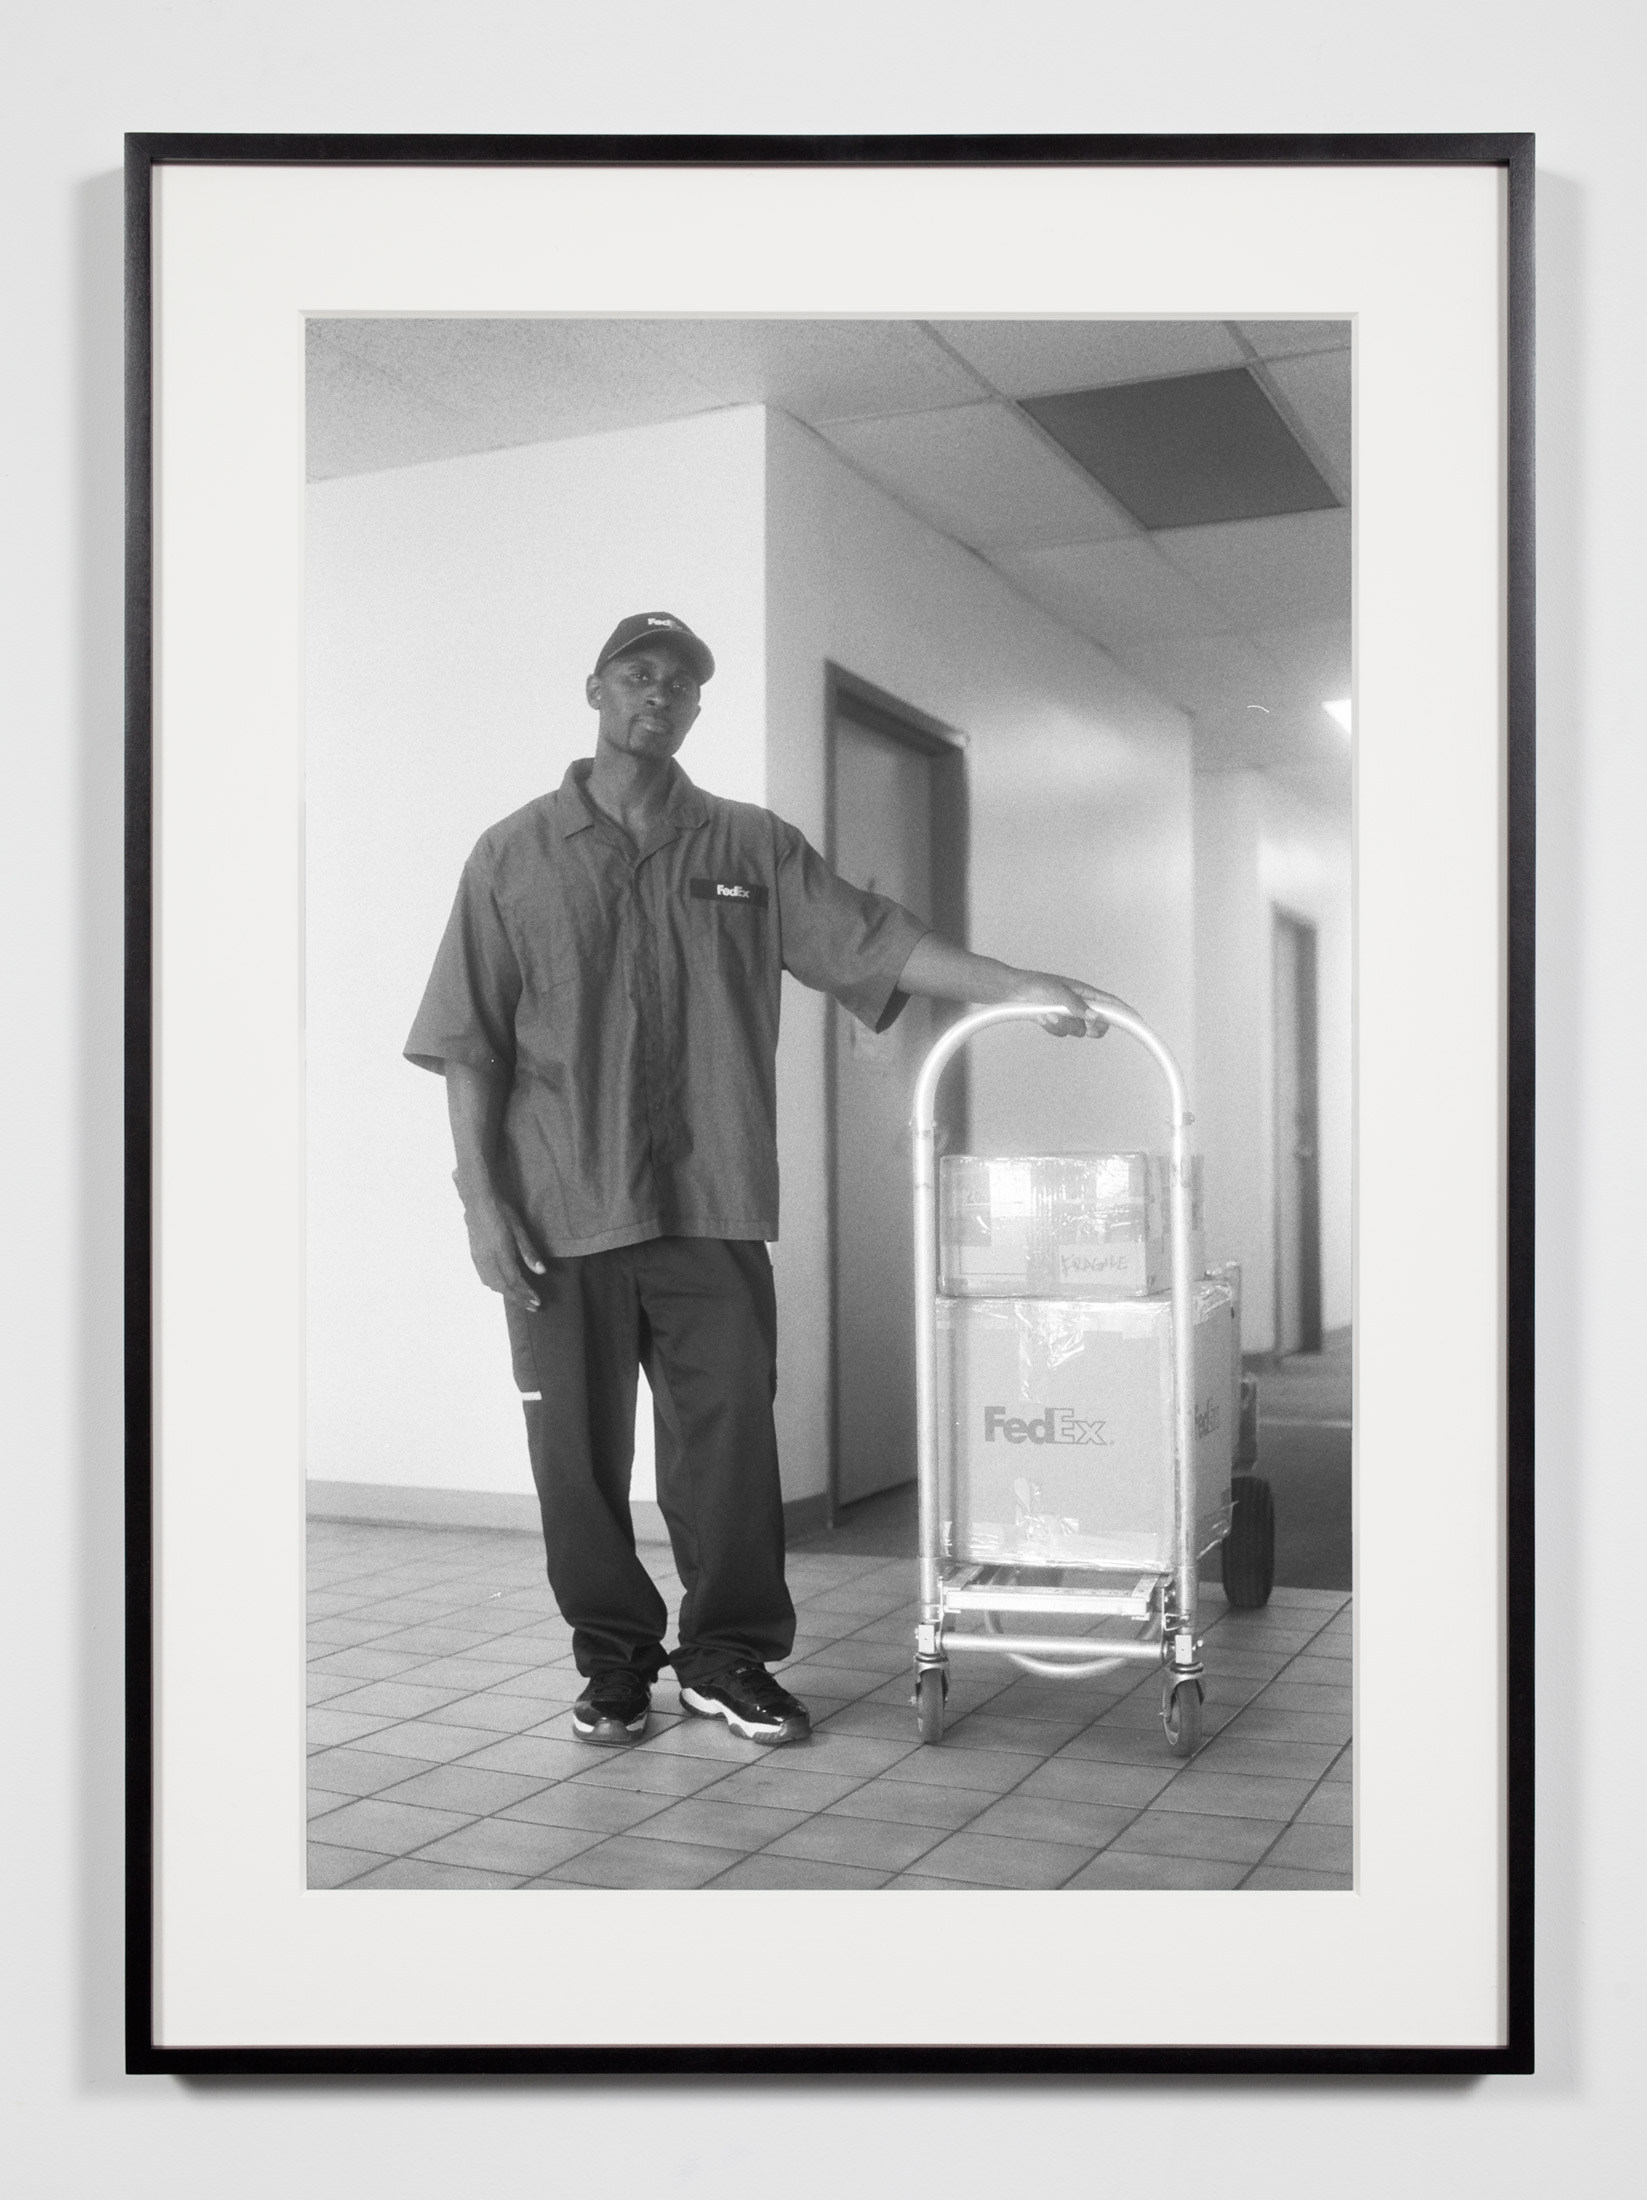   FedEx Courier, Los Angeles, California, September 12, 2008    2011   Epson Ultrachrome K3 archival ink jet print on Hahnemühle Photo Rag paper  36 3/8 x 26 3/8 inches   Industrial Portraits, 2008–     